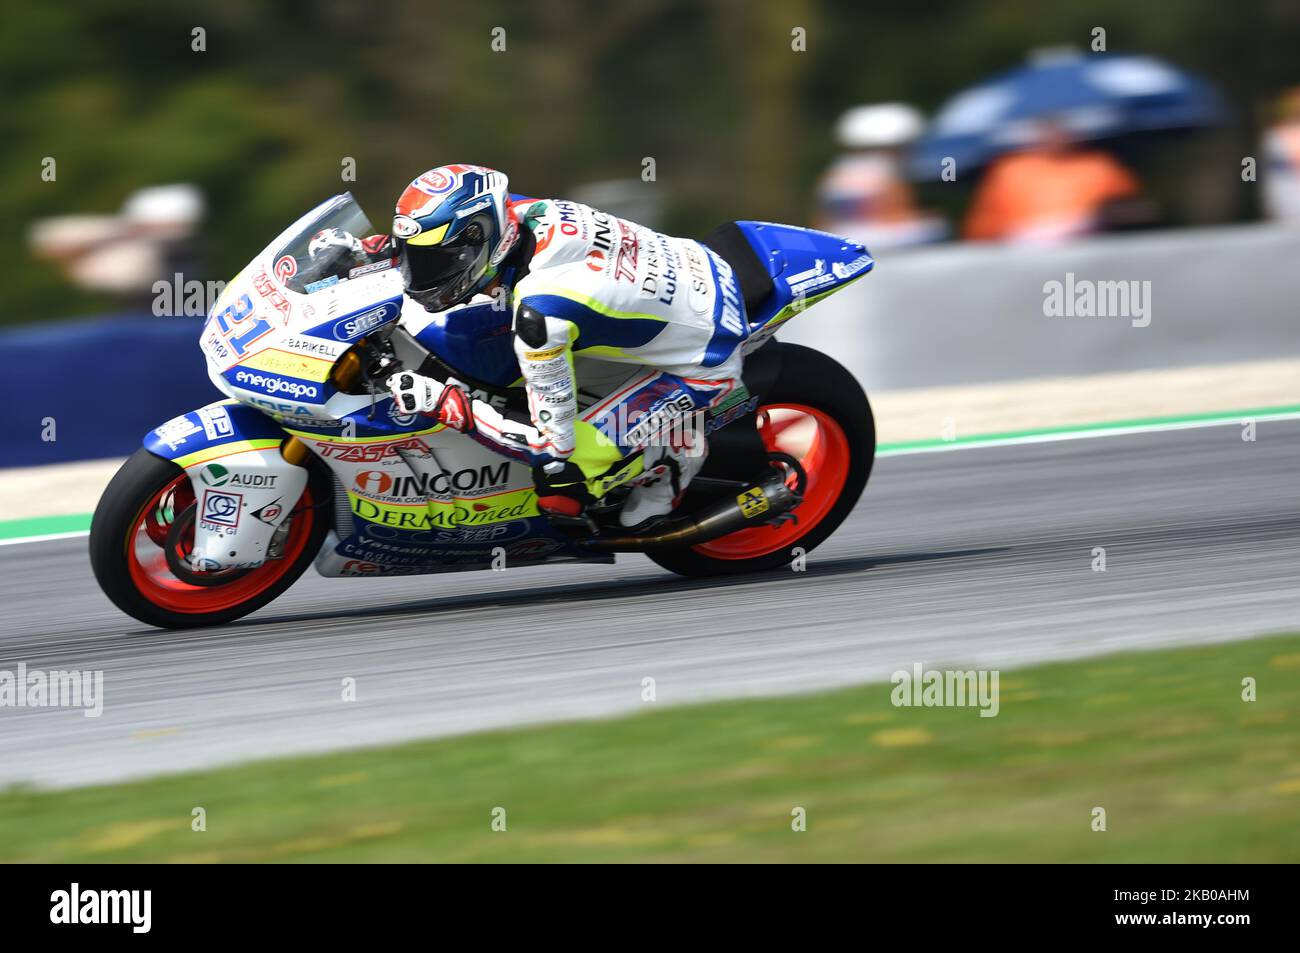 21 Italian driver Federico Fuligni of team Tasca Racing race during free practice of Austrian MotoGP grand prix in Red Bull Ring in Spielberg, Austria, on August 10, 2018. (Photo by Andrea Diodato/NurPhoto) Stock Photo